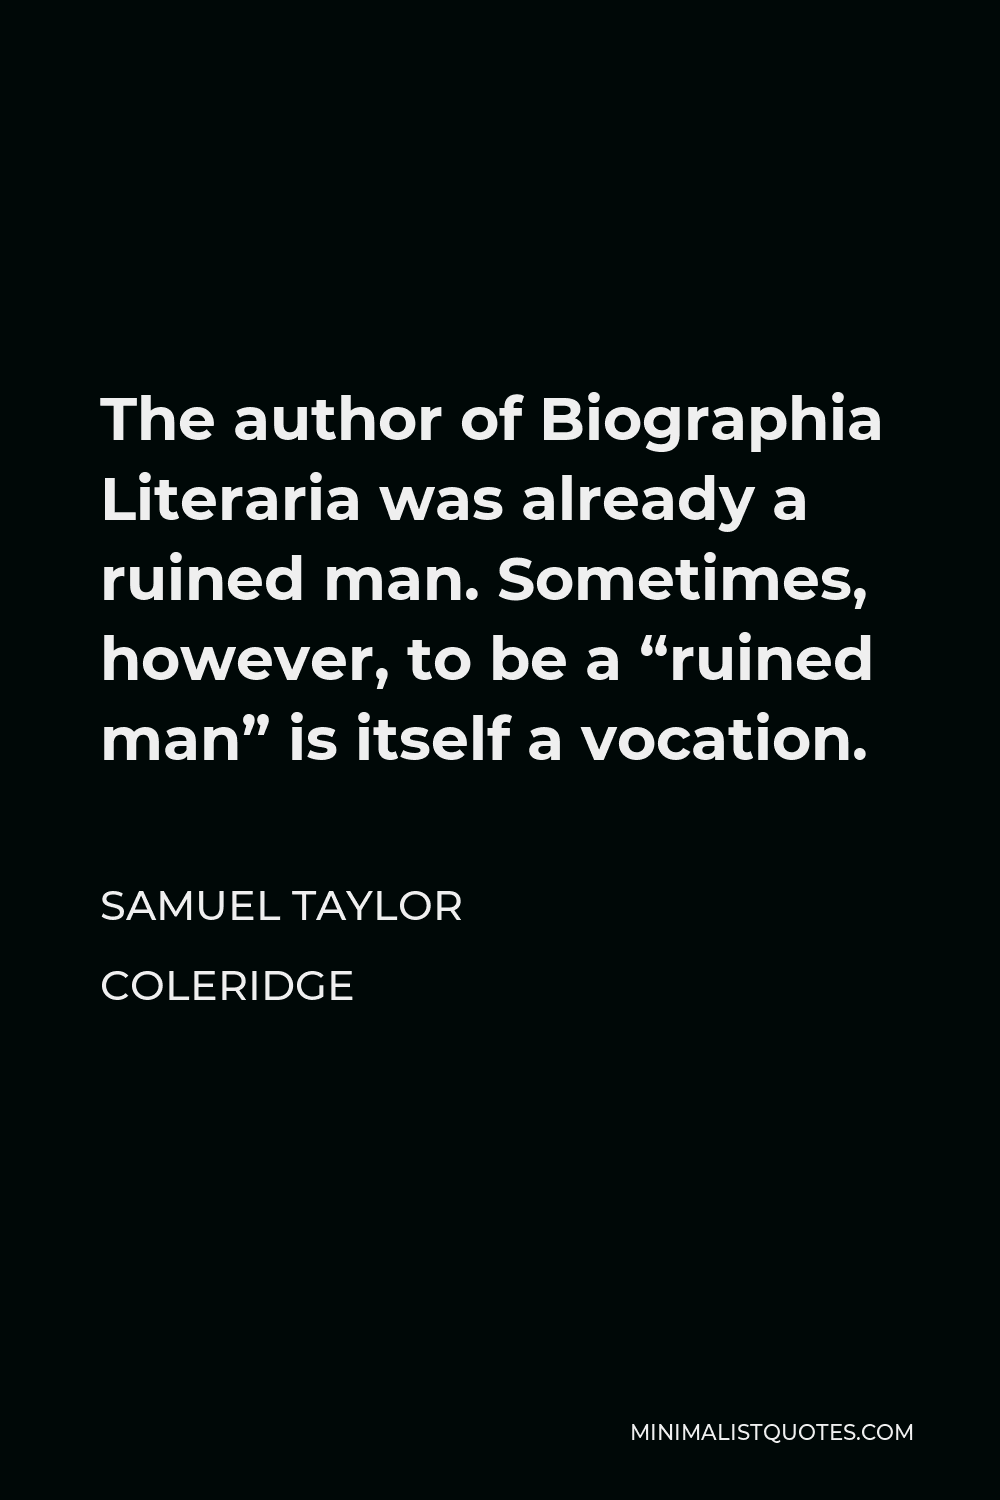 Samuel Taylor Coleridge Quote - The author of Biographia Literaria was already a ruined man. Sometimes, however, to be a “ruined man” is itself a vocation.